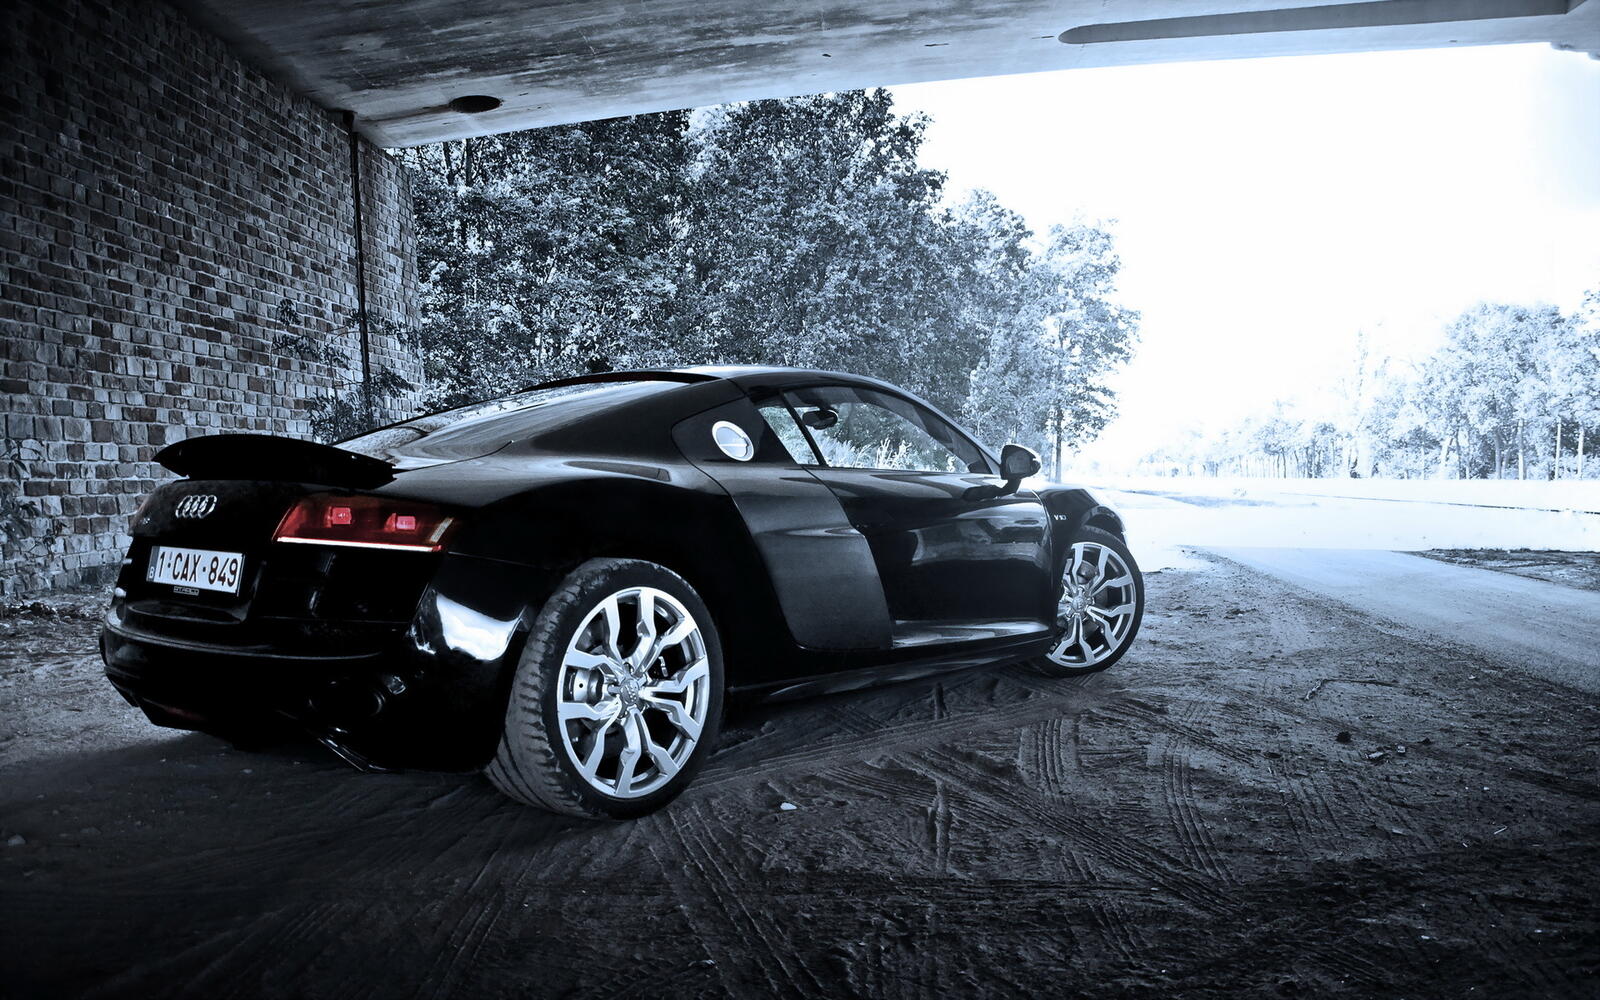 Wallpapers car speed aud on the desktop